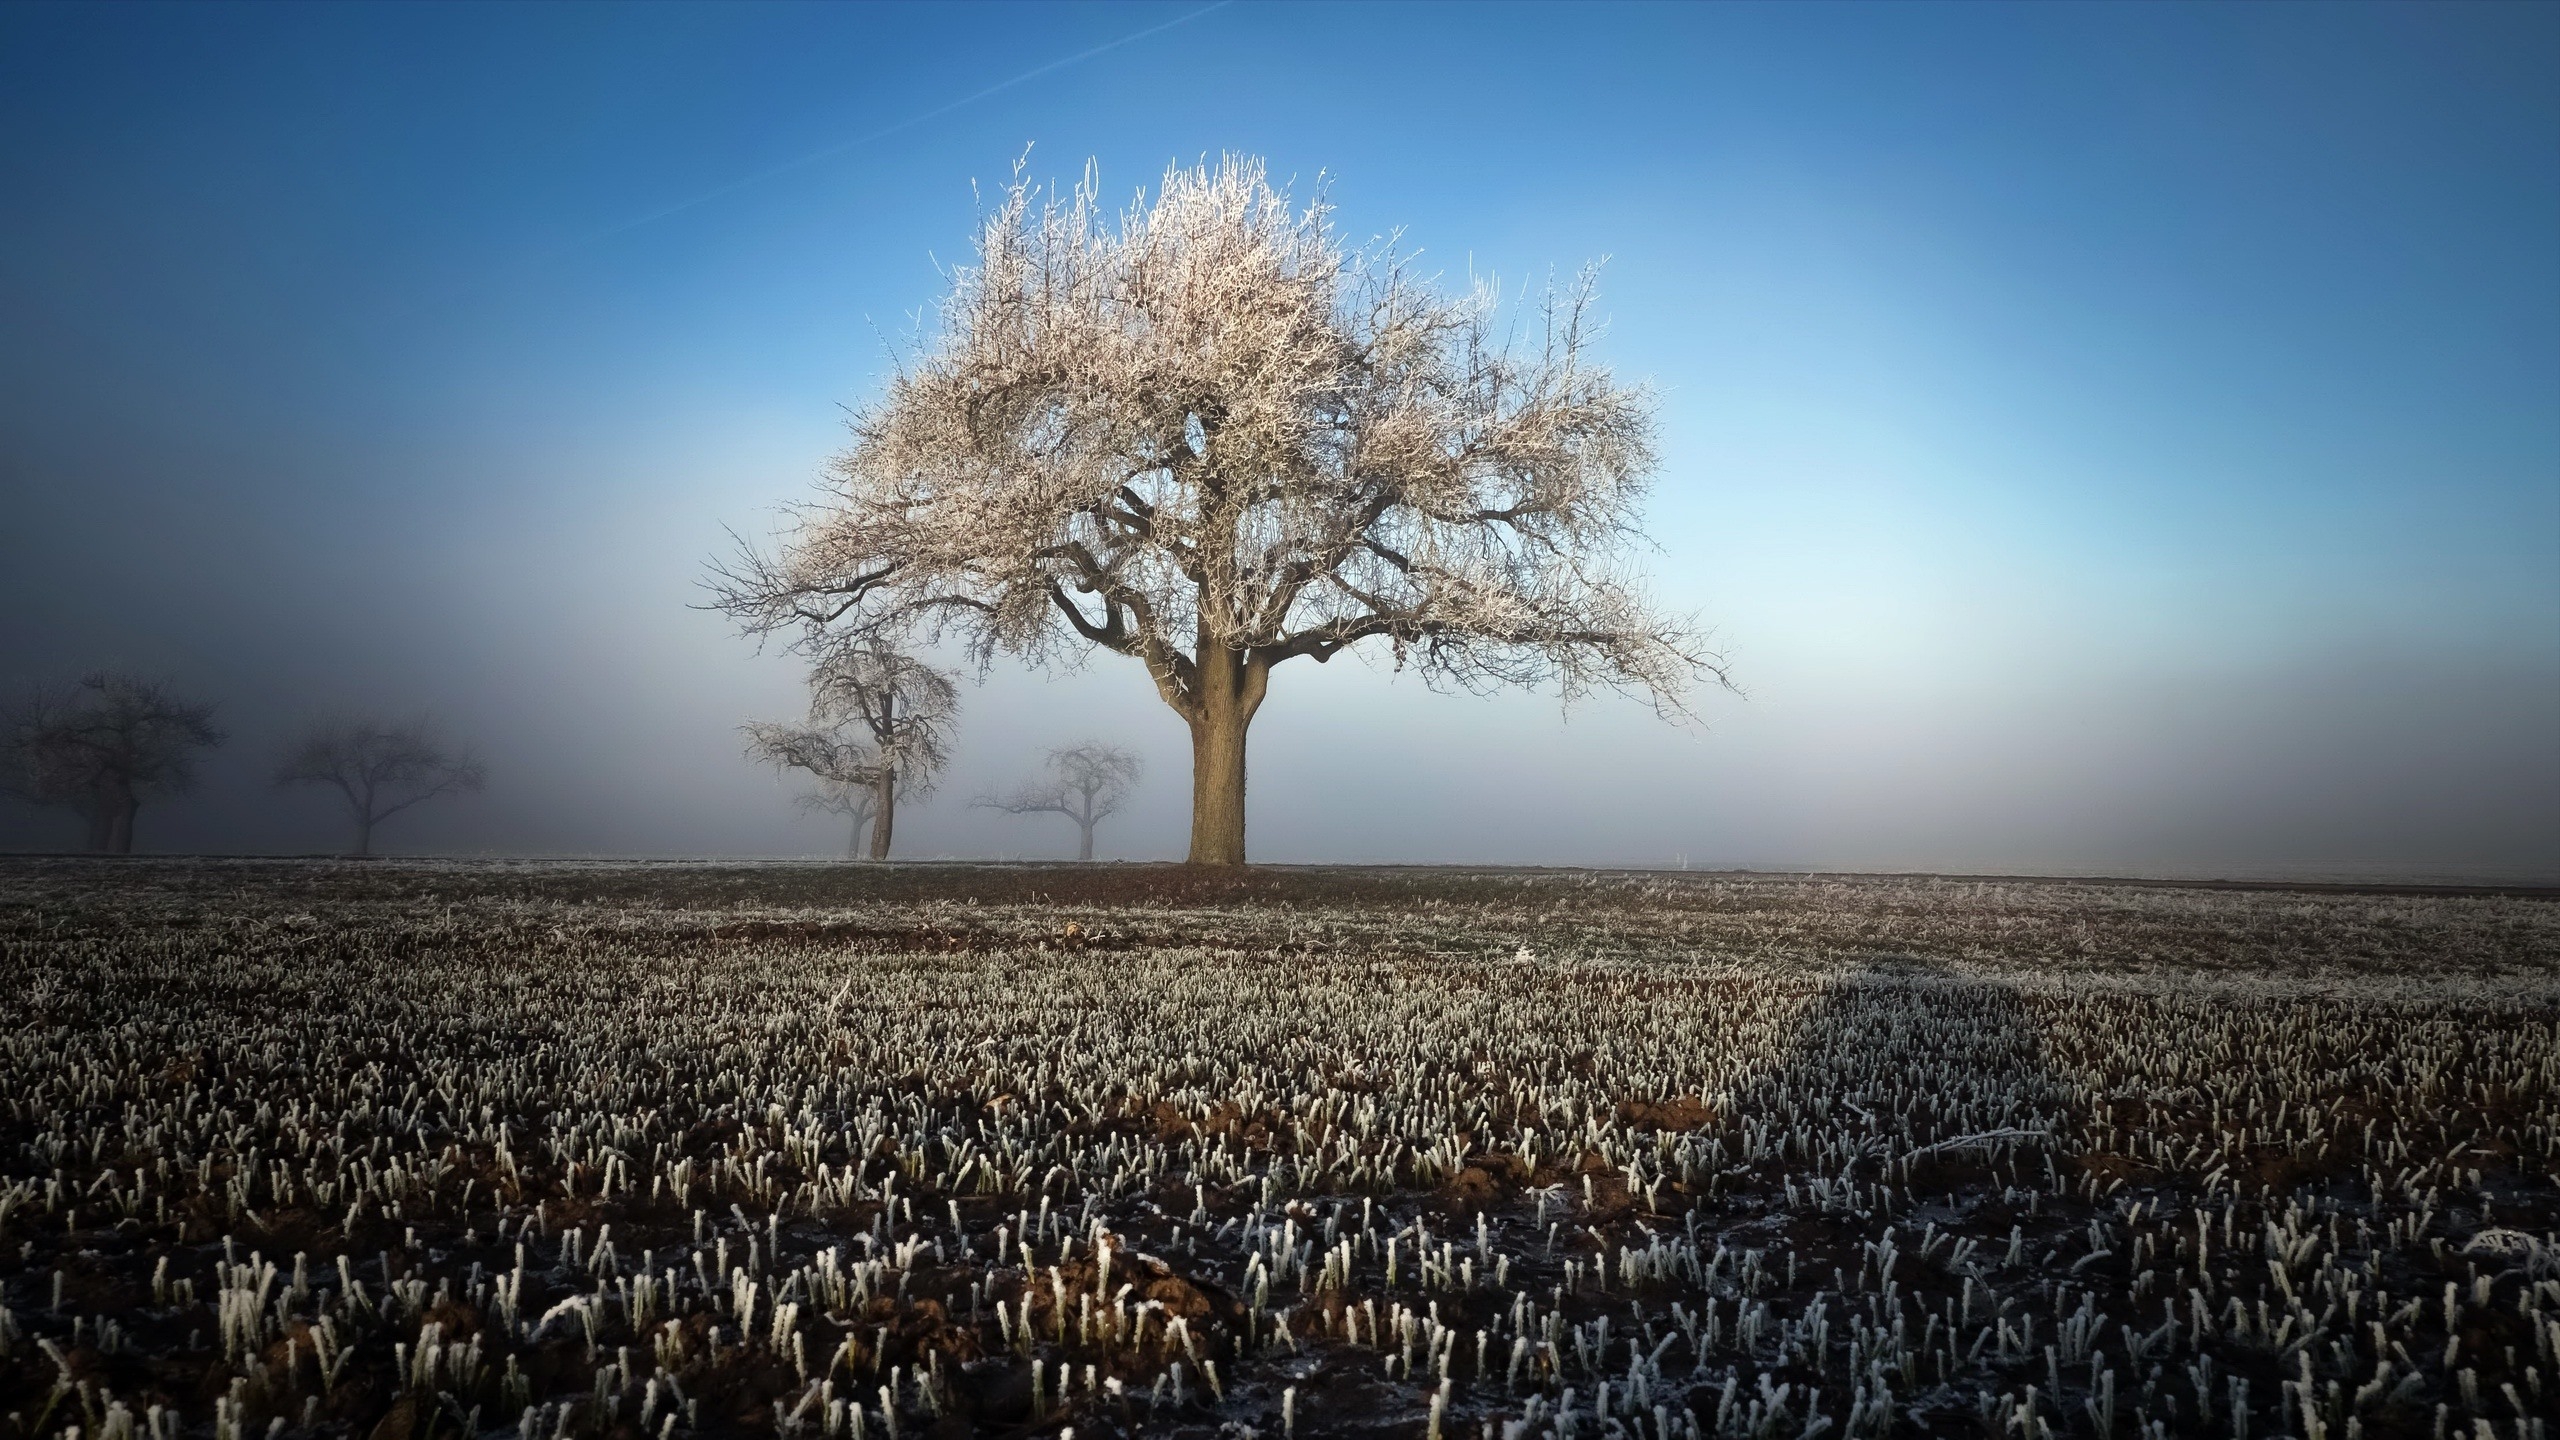 A big lonely tree in a foggy field